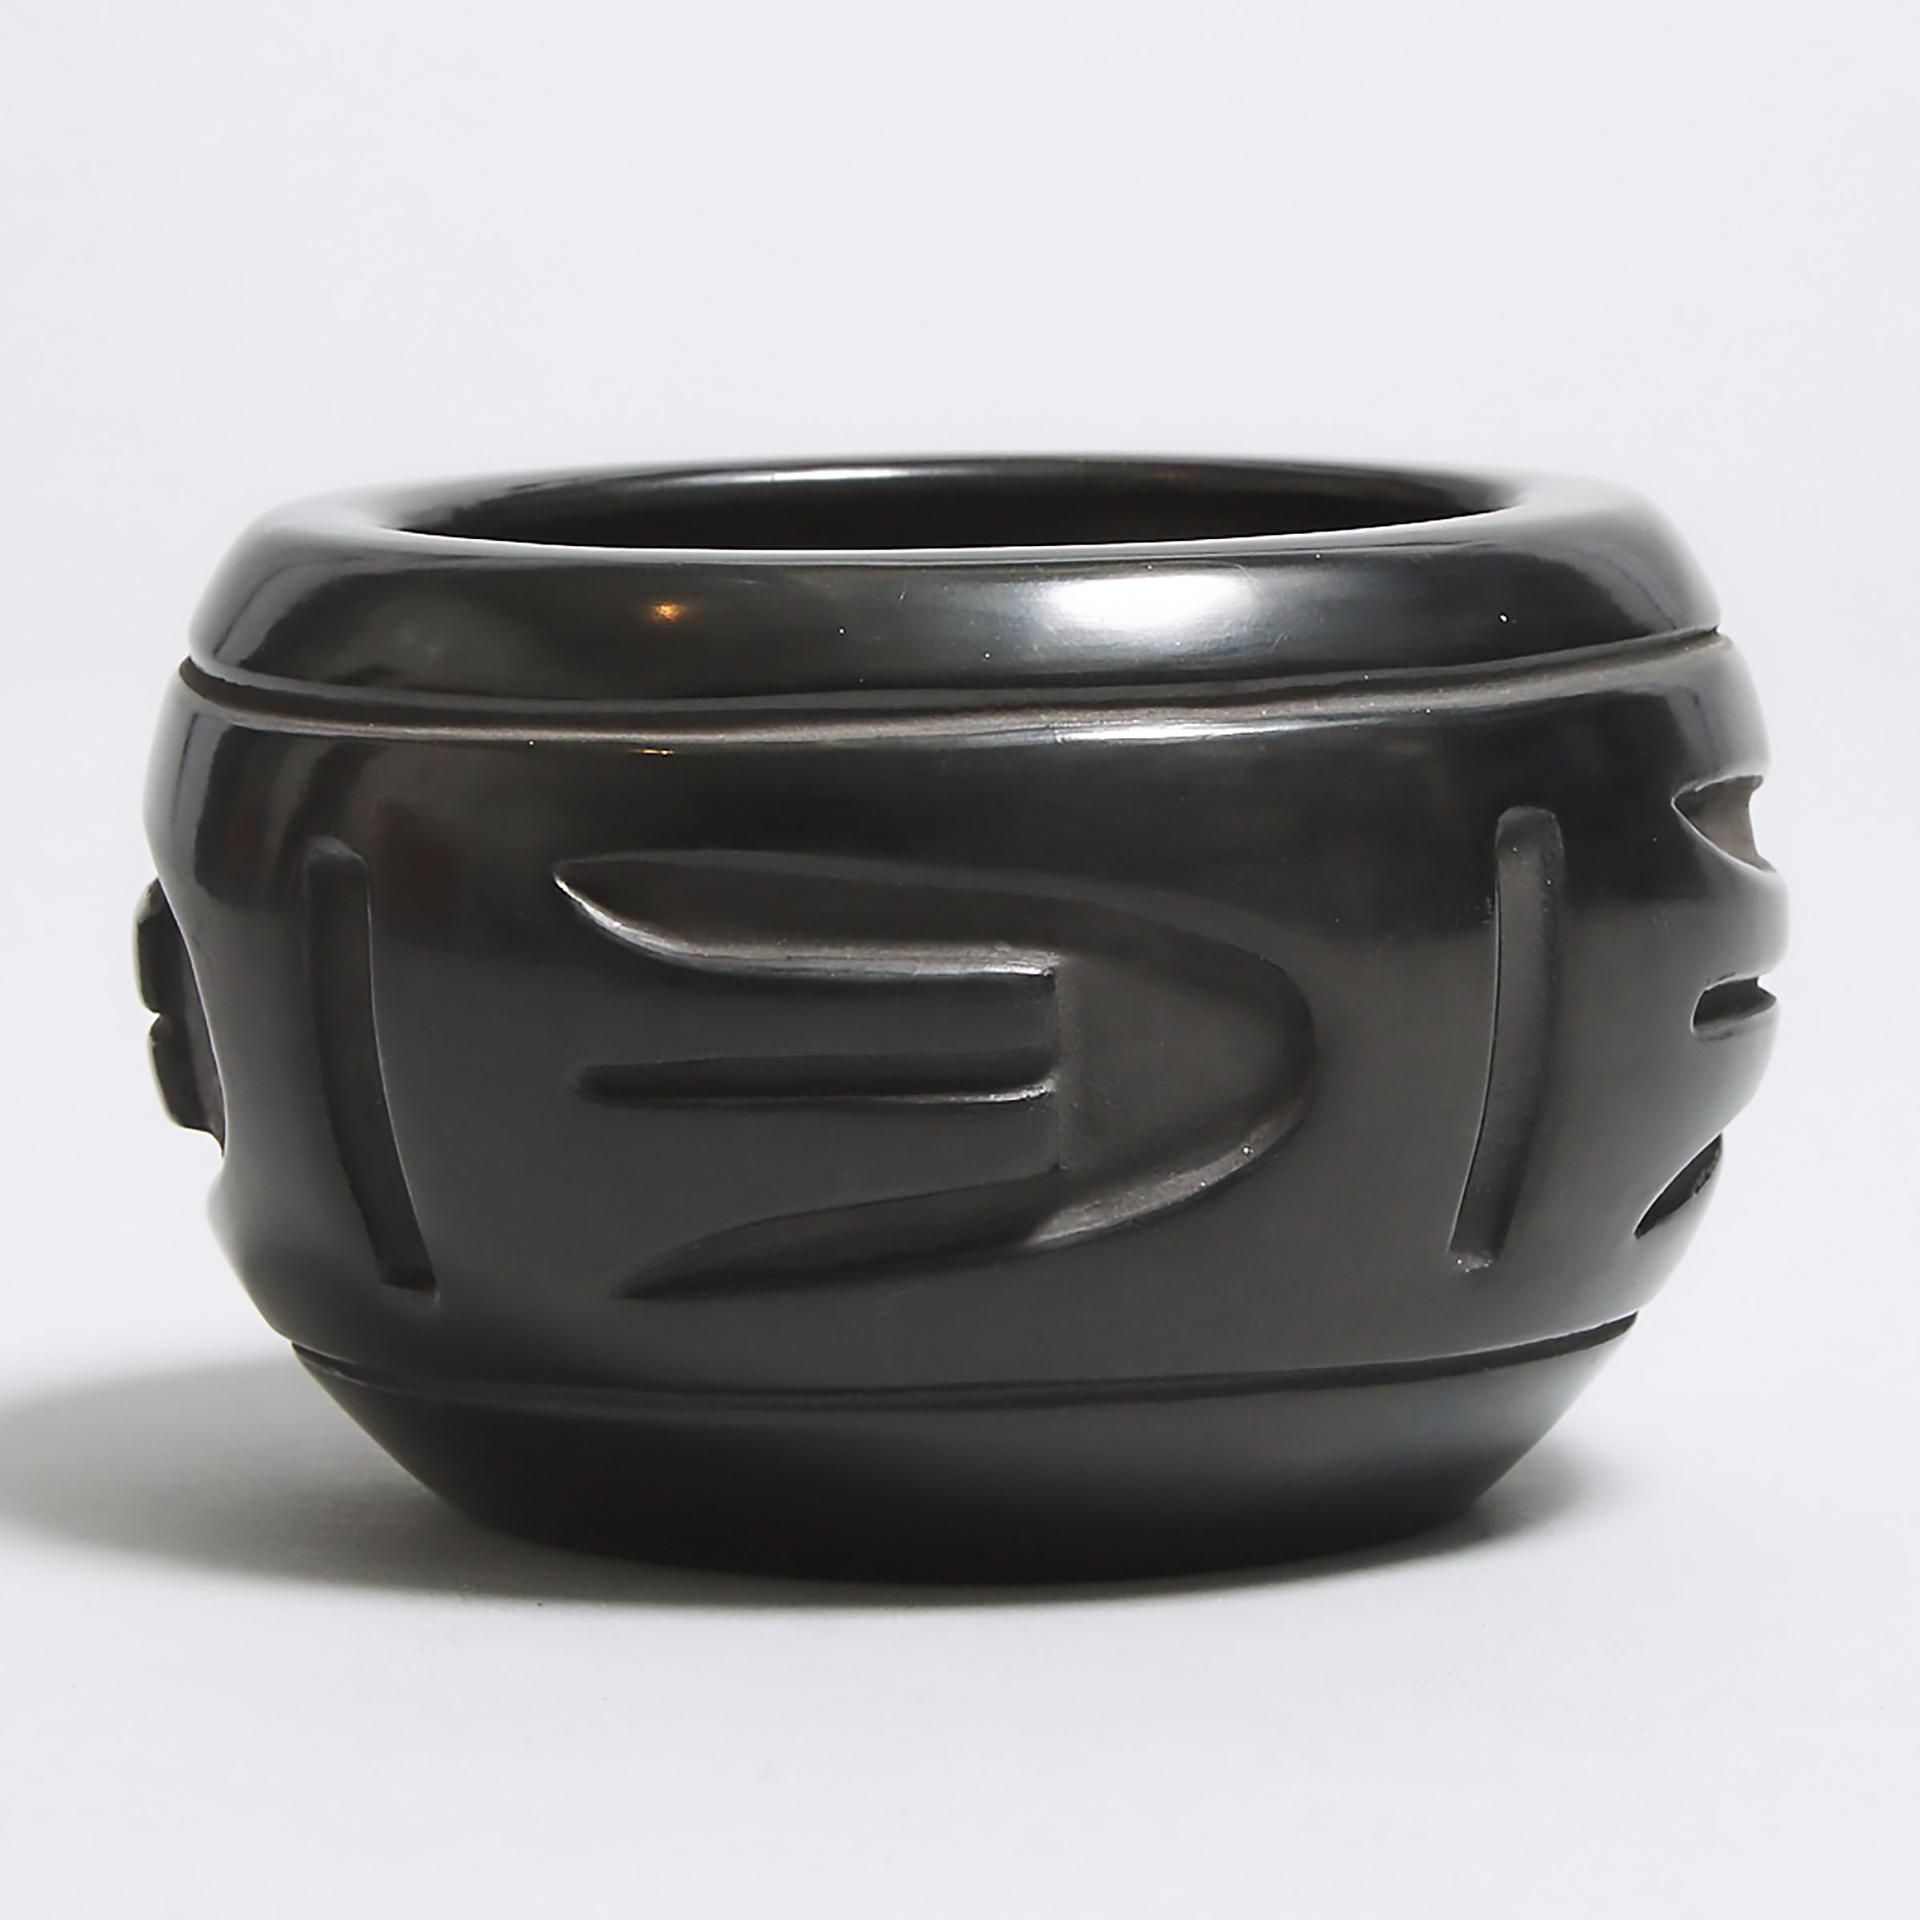 Florence Chavarria Browning (1931) - Pueblo Carved And Polished Coiled Black Ware Pottery Jar, Santa Clara, New Mexico, 1971